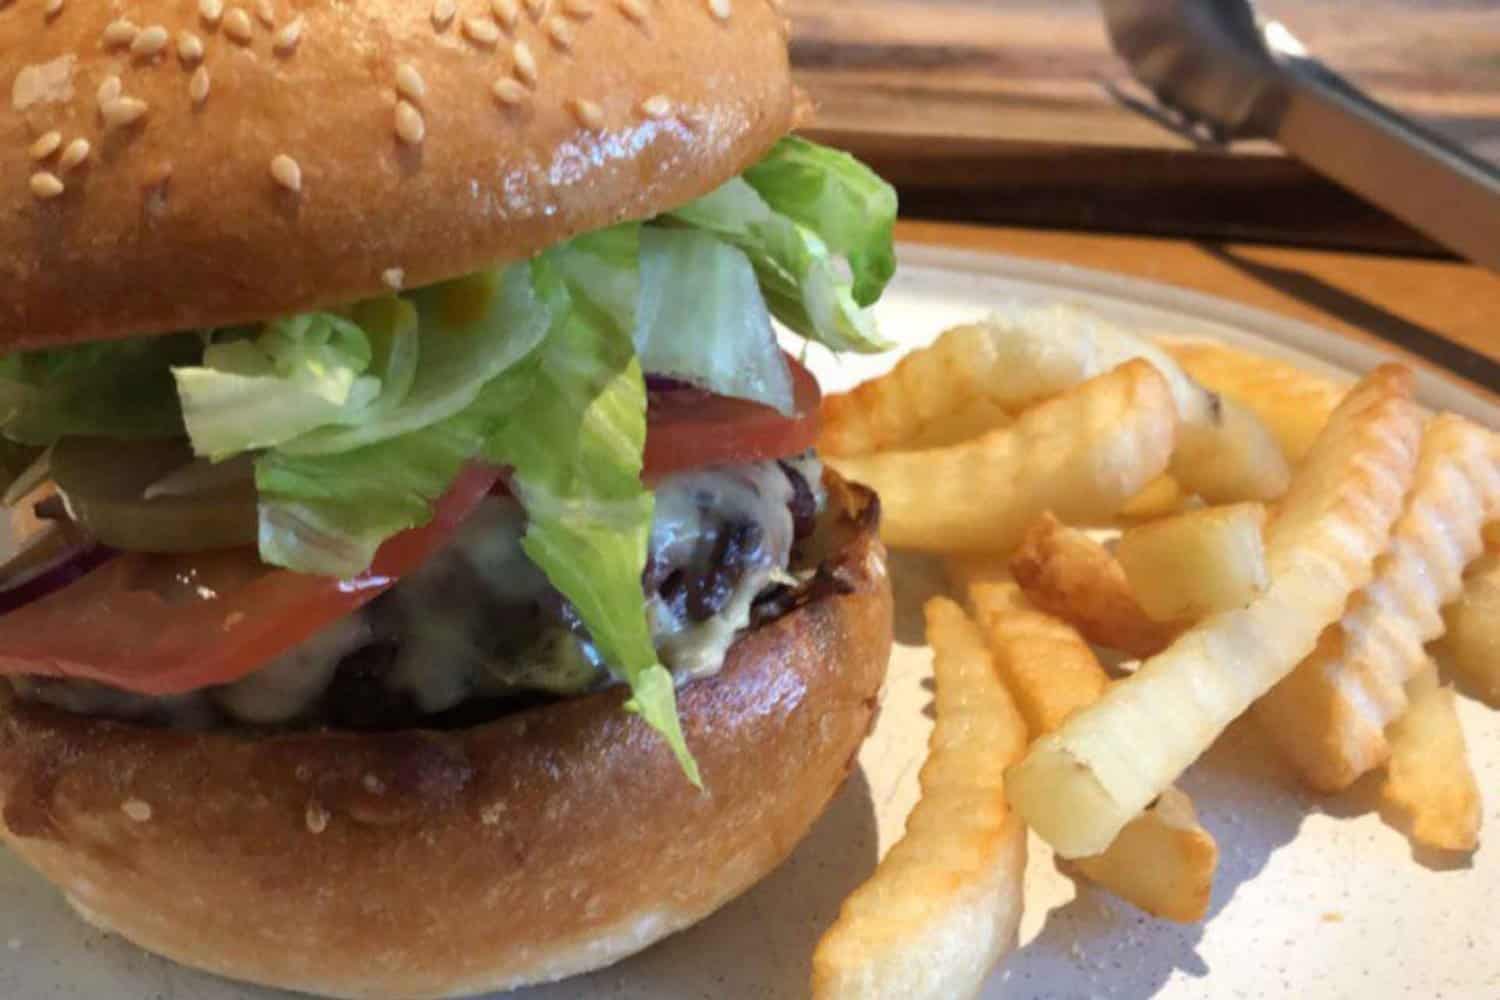 A mouthwatering burger and a side of golden, crispy chips presented in a takeaway setting. The burger is stacked with a juicy patty, fresh lettuce, ripe tomatoes, melted cheese, and savory sauce. The image showcases a delectable takeaway meal option in Margaret River